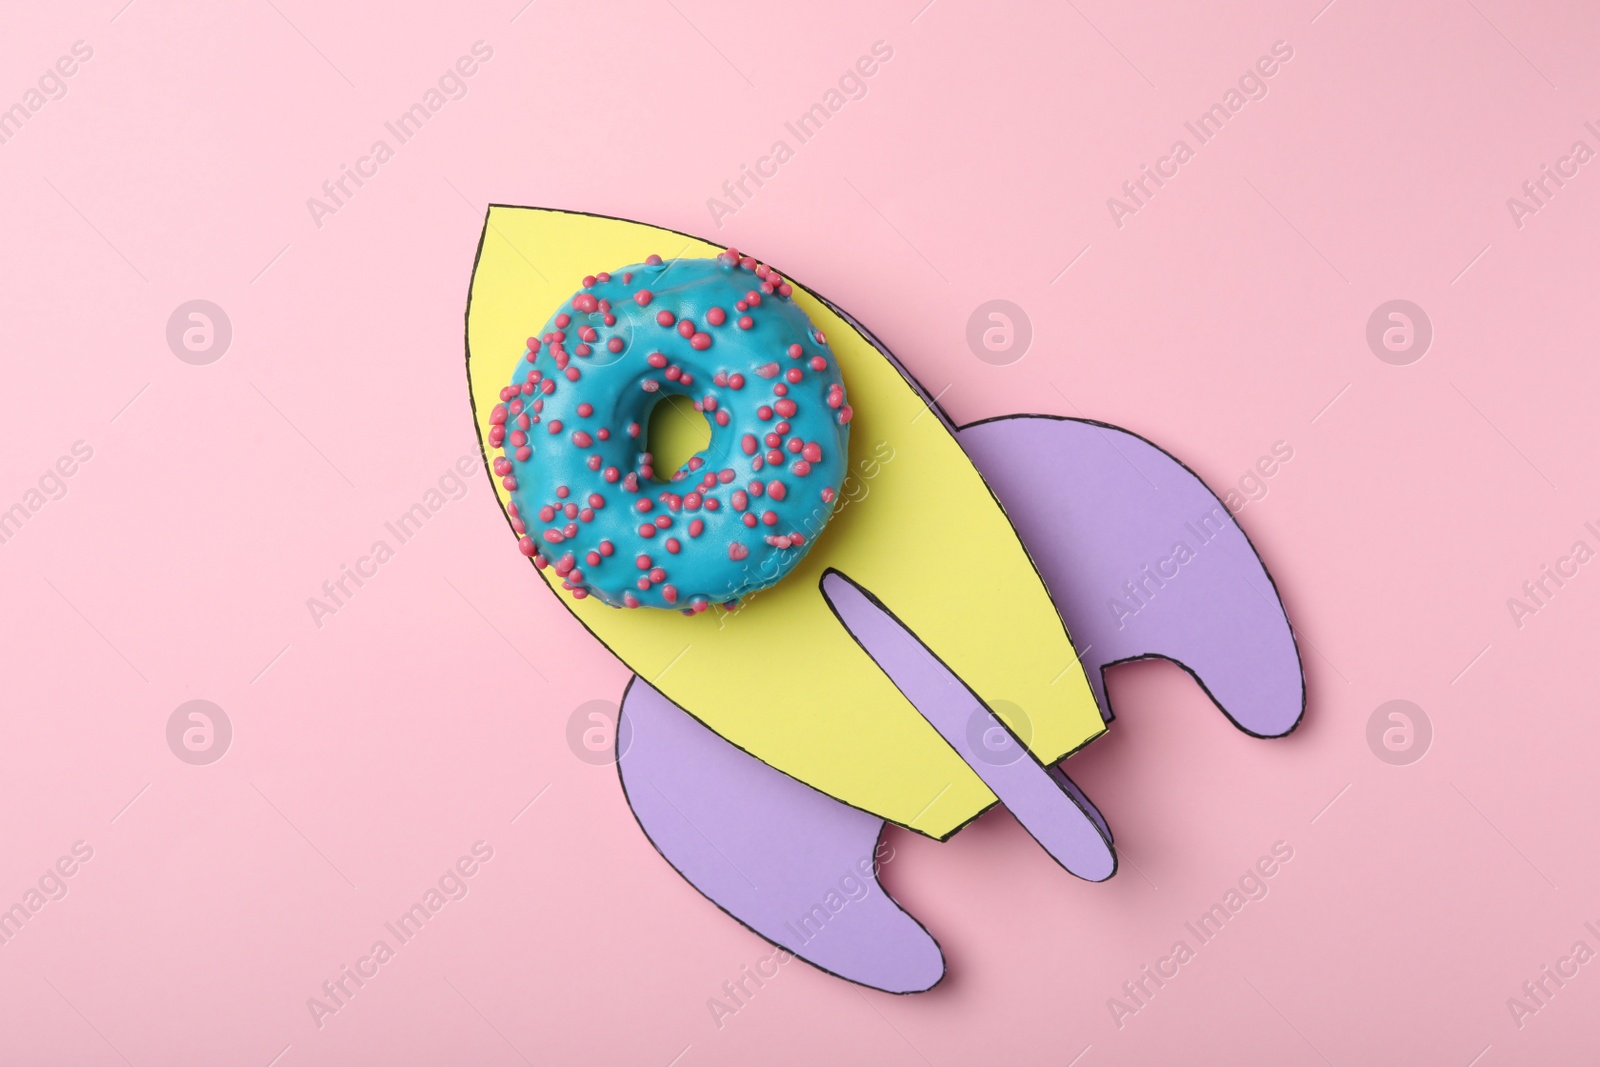 Photo of Rocket made with donut and paper on pink background, top view